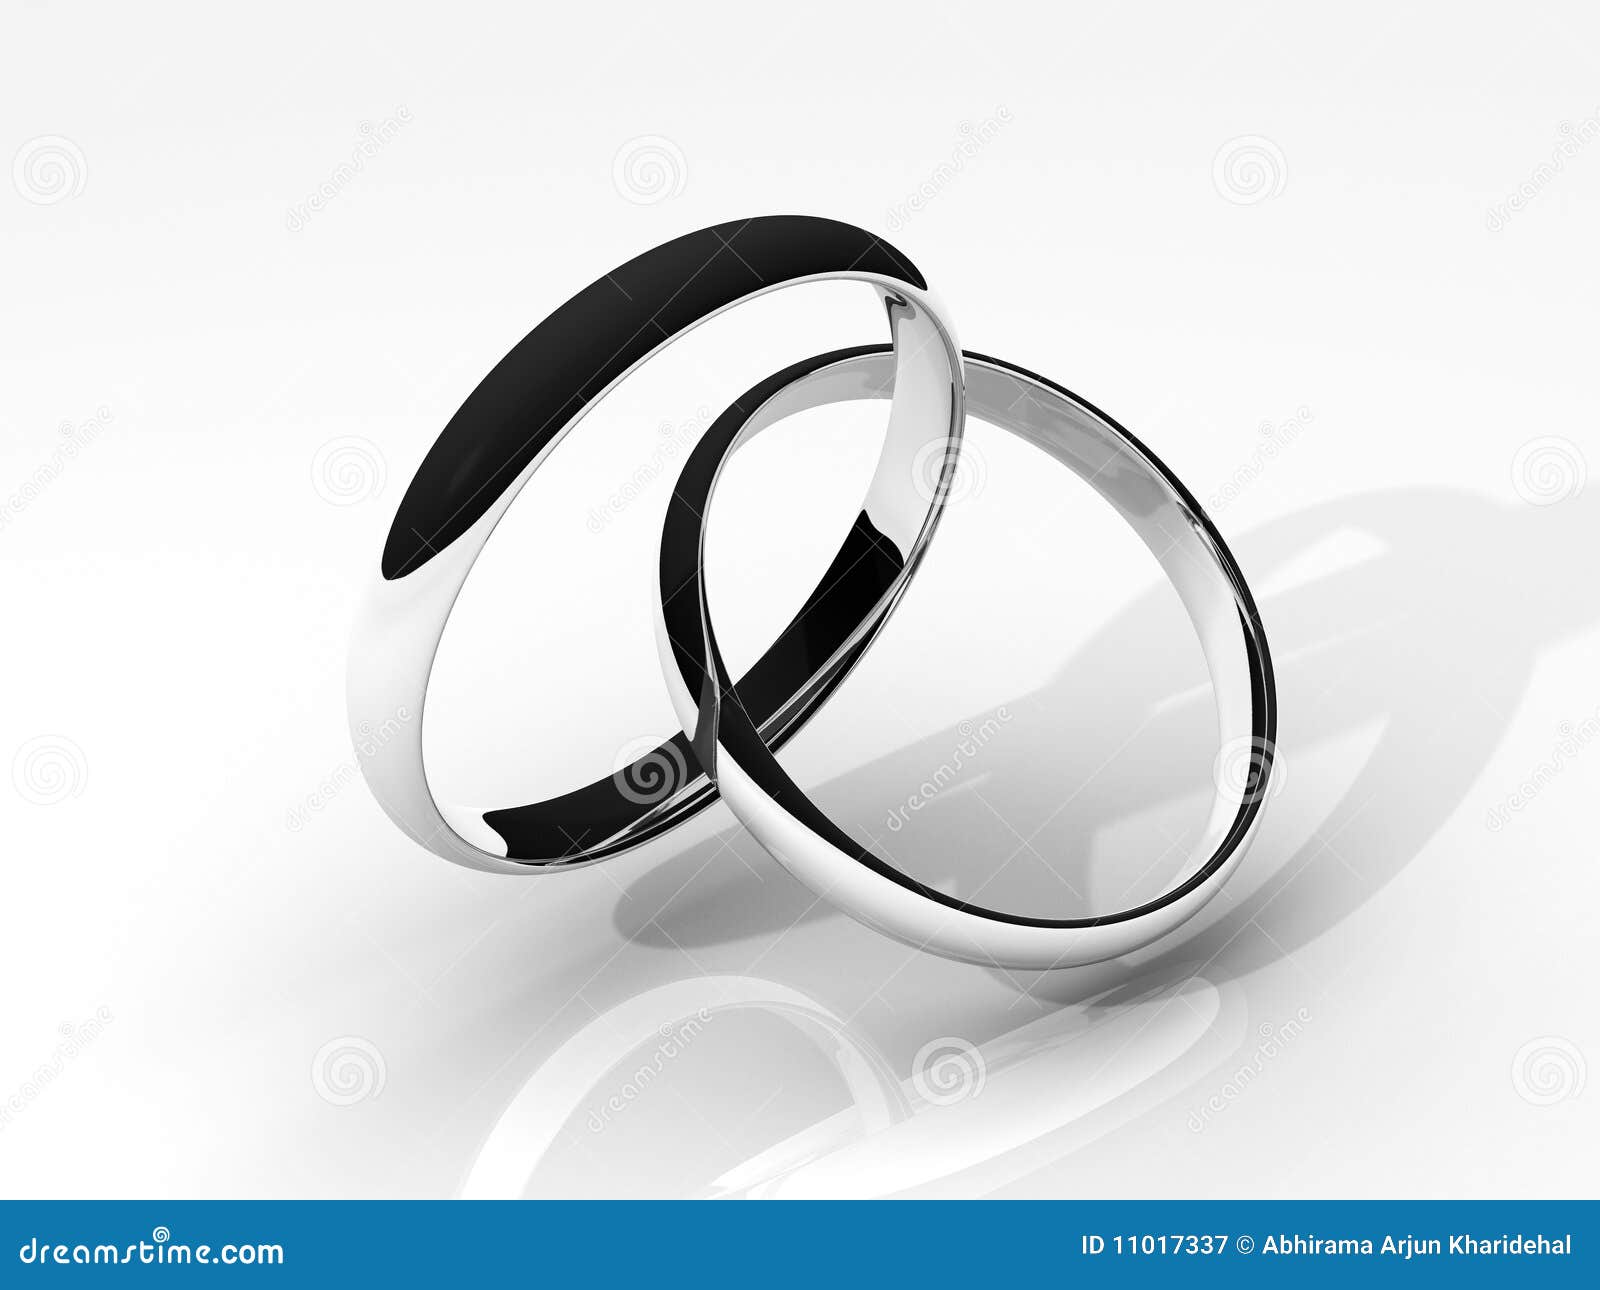 3D rendered image of a pair of silver wedding rings.